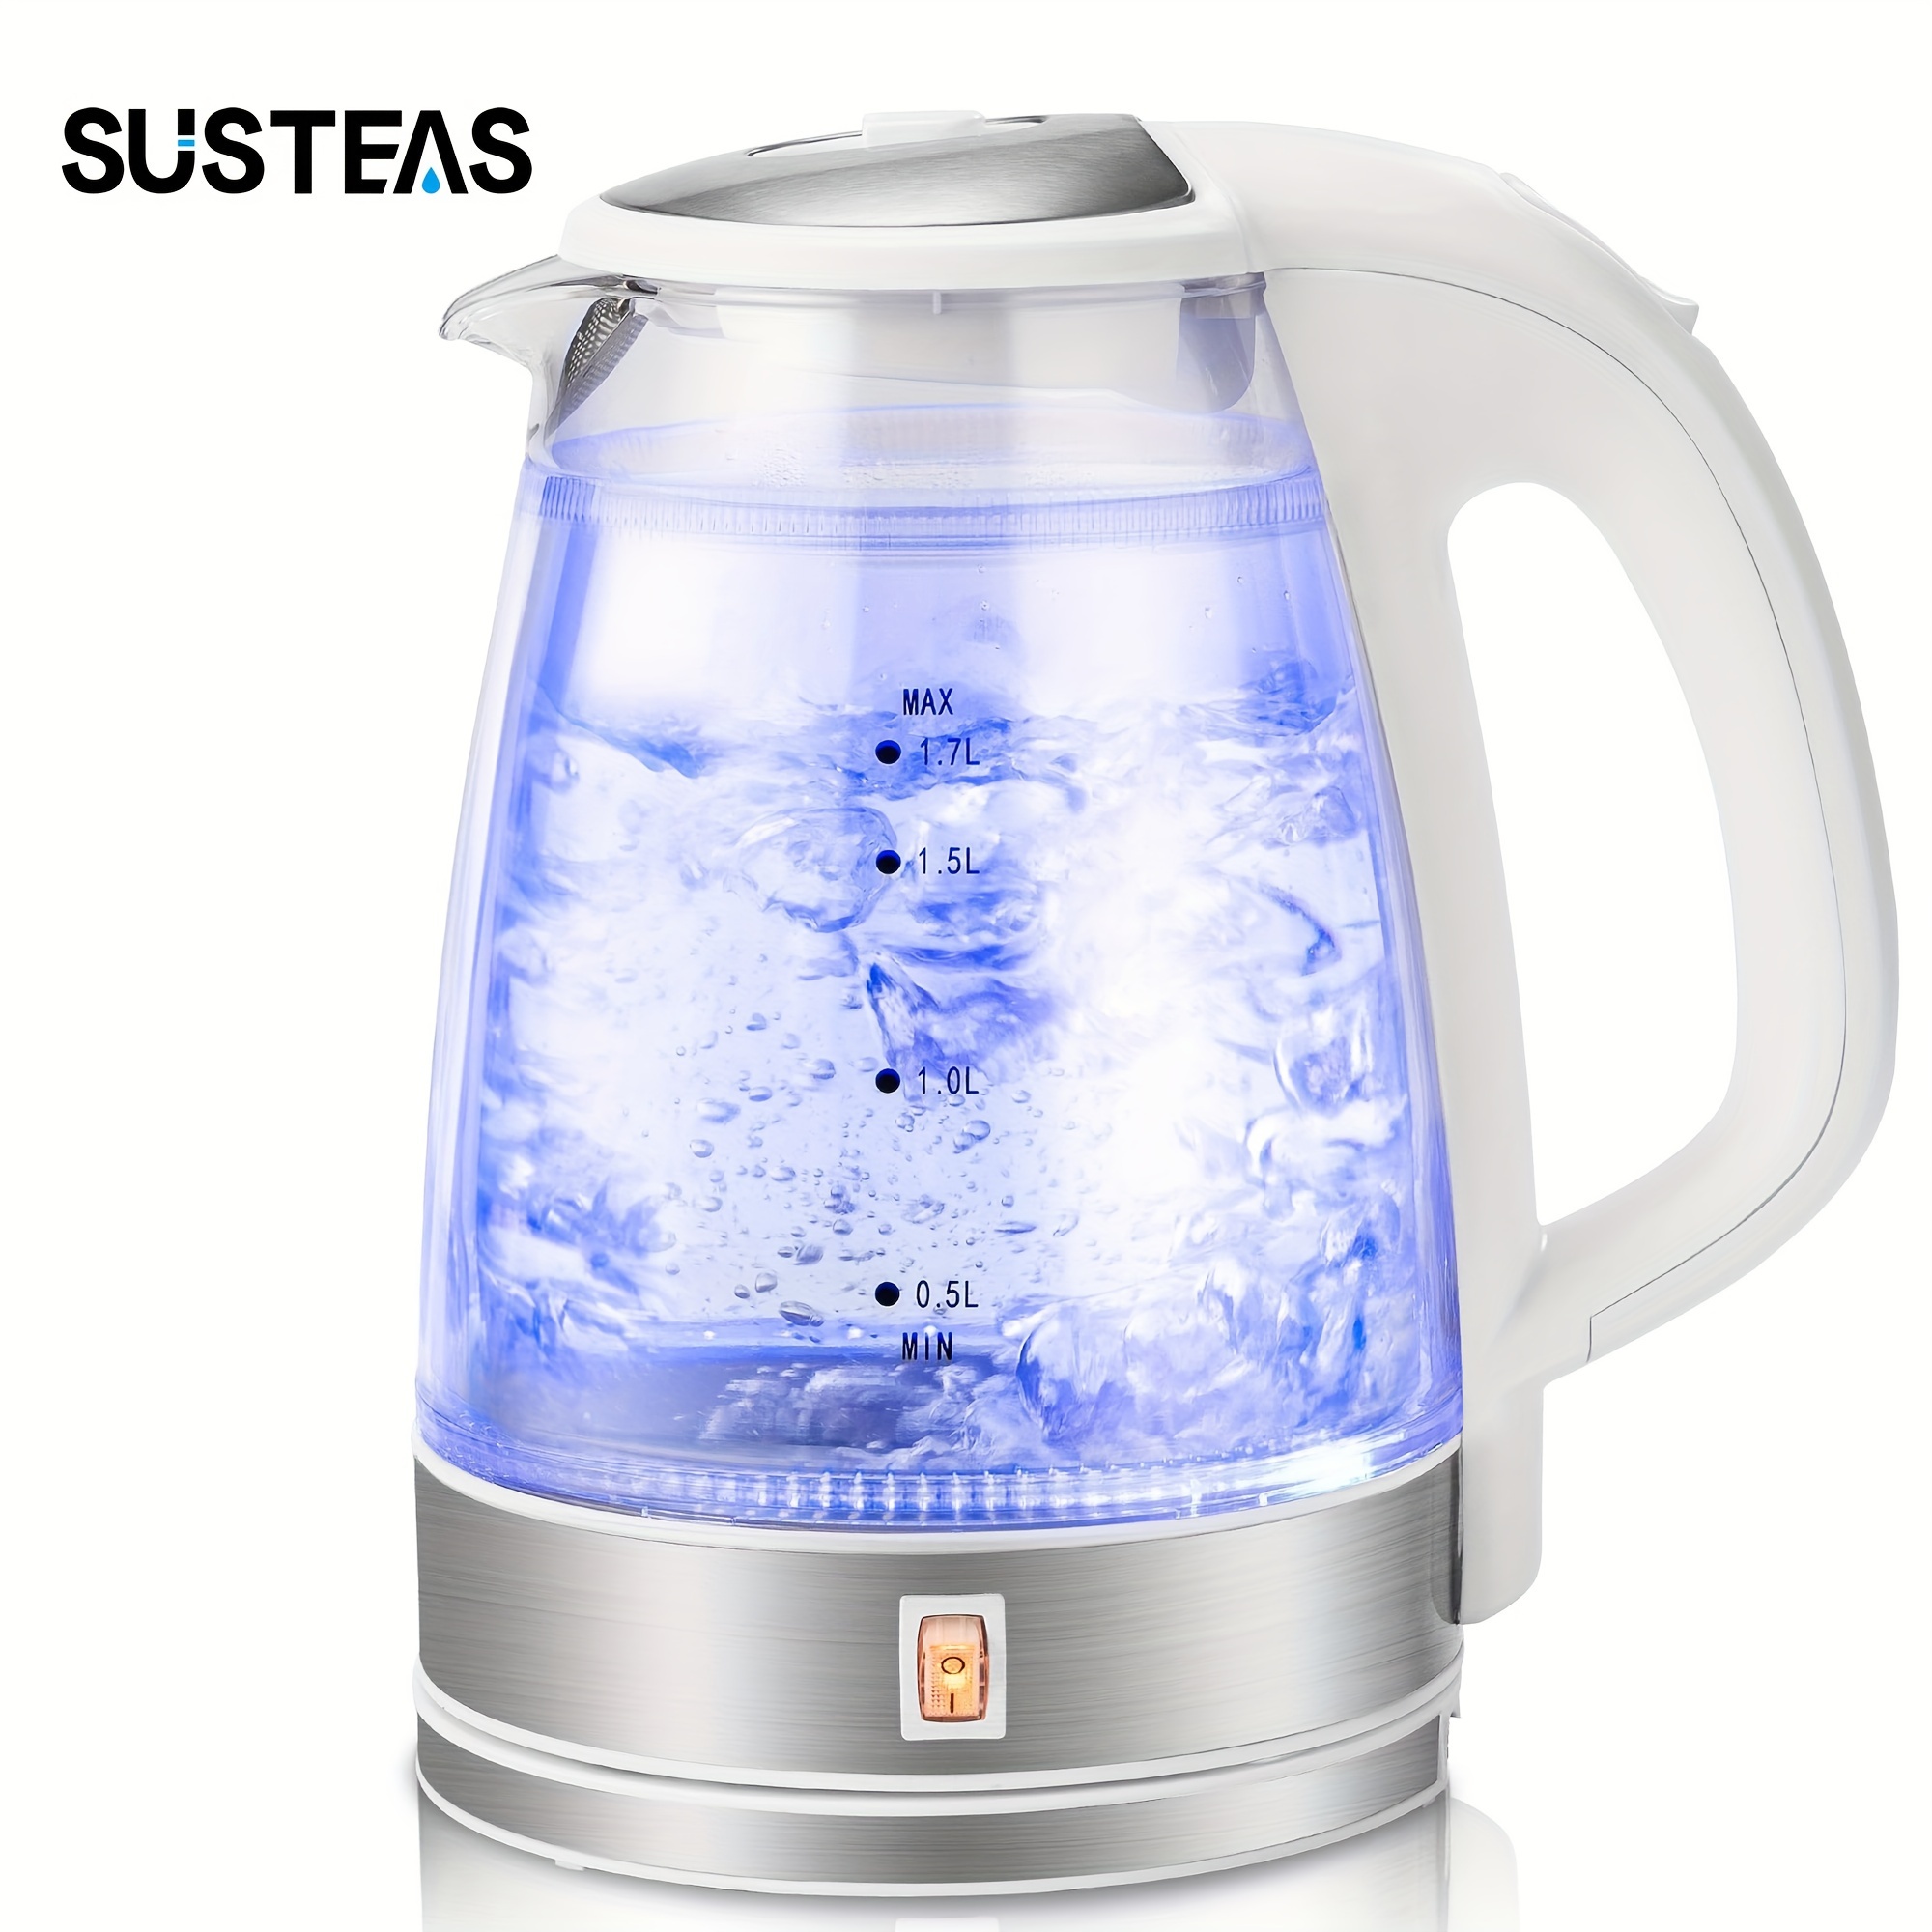 

Susteas Double Wall Electric Glass Kettle With 6 Hours Keep Warm Function, 1200w Hot Water Boiler, Cool Touch Electric Tea Kettle, Auto Shut-off And Boil-dry Protection, Bpa Free Borosilicate Glass